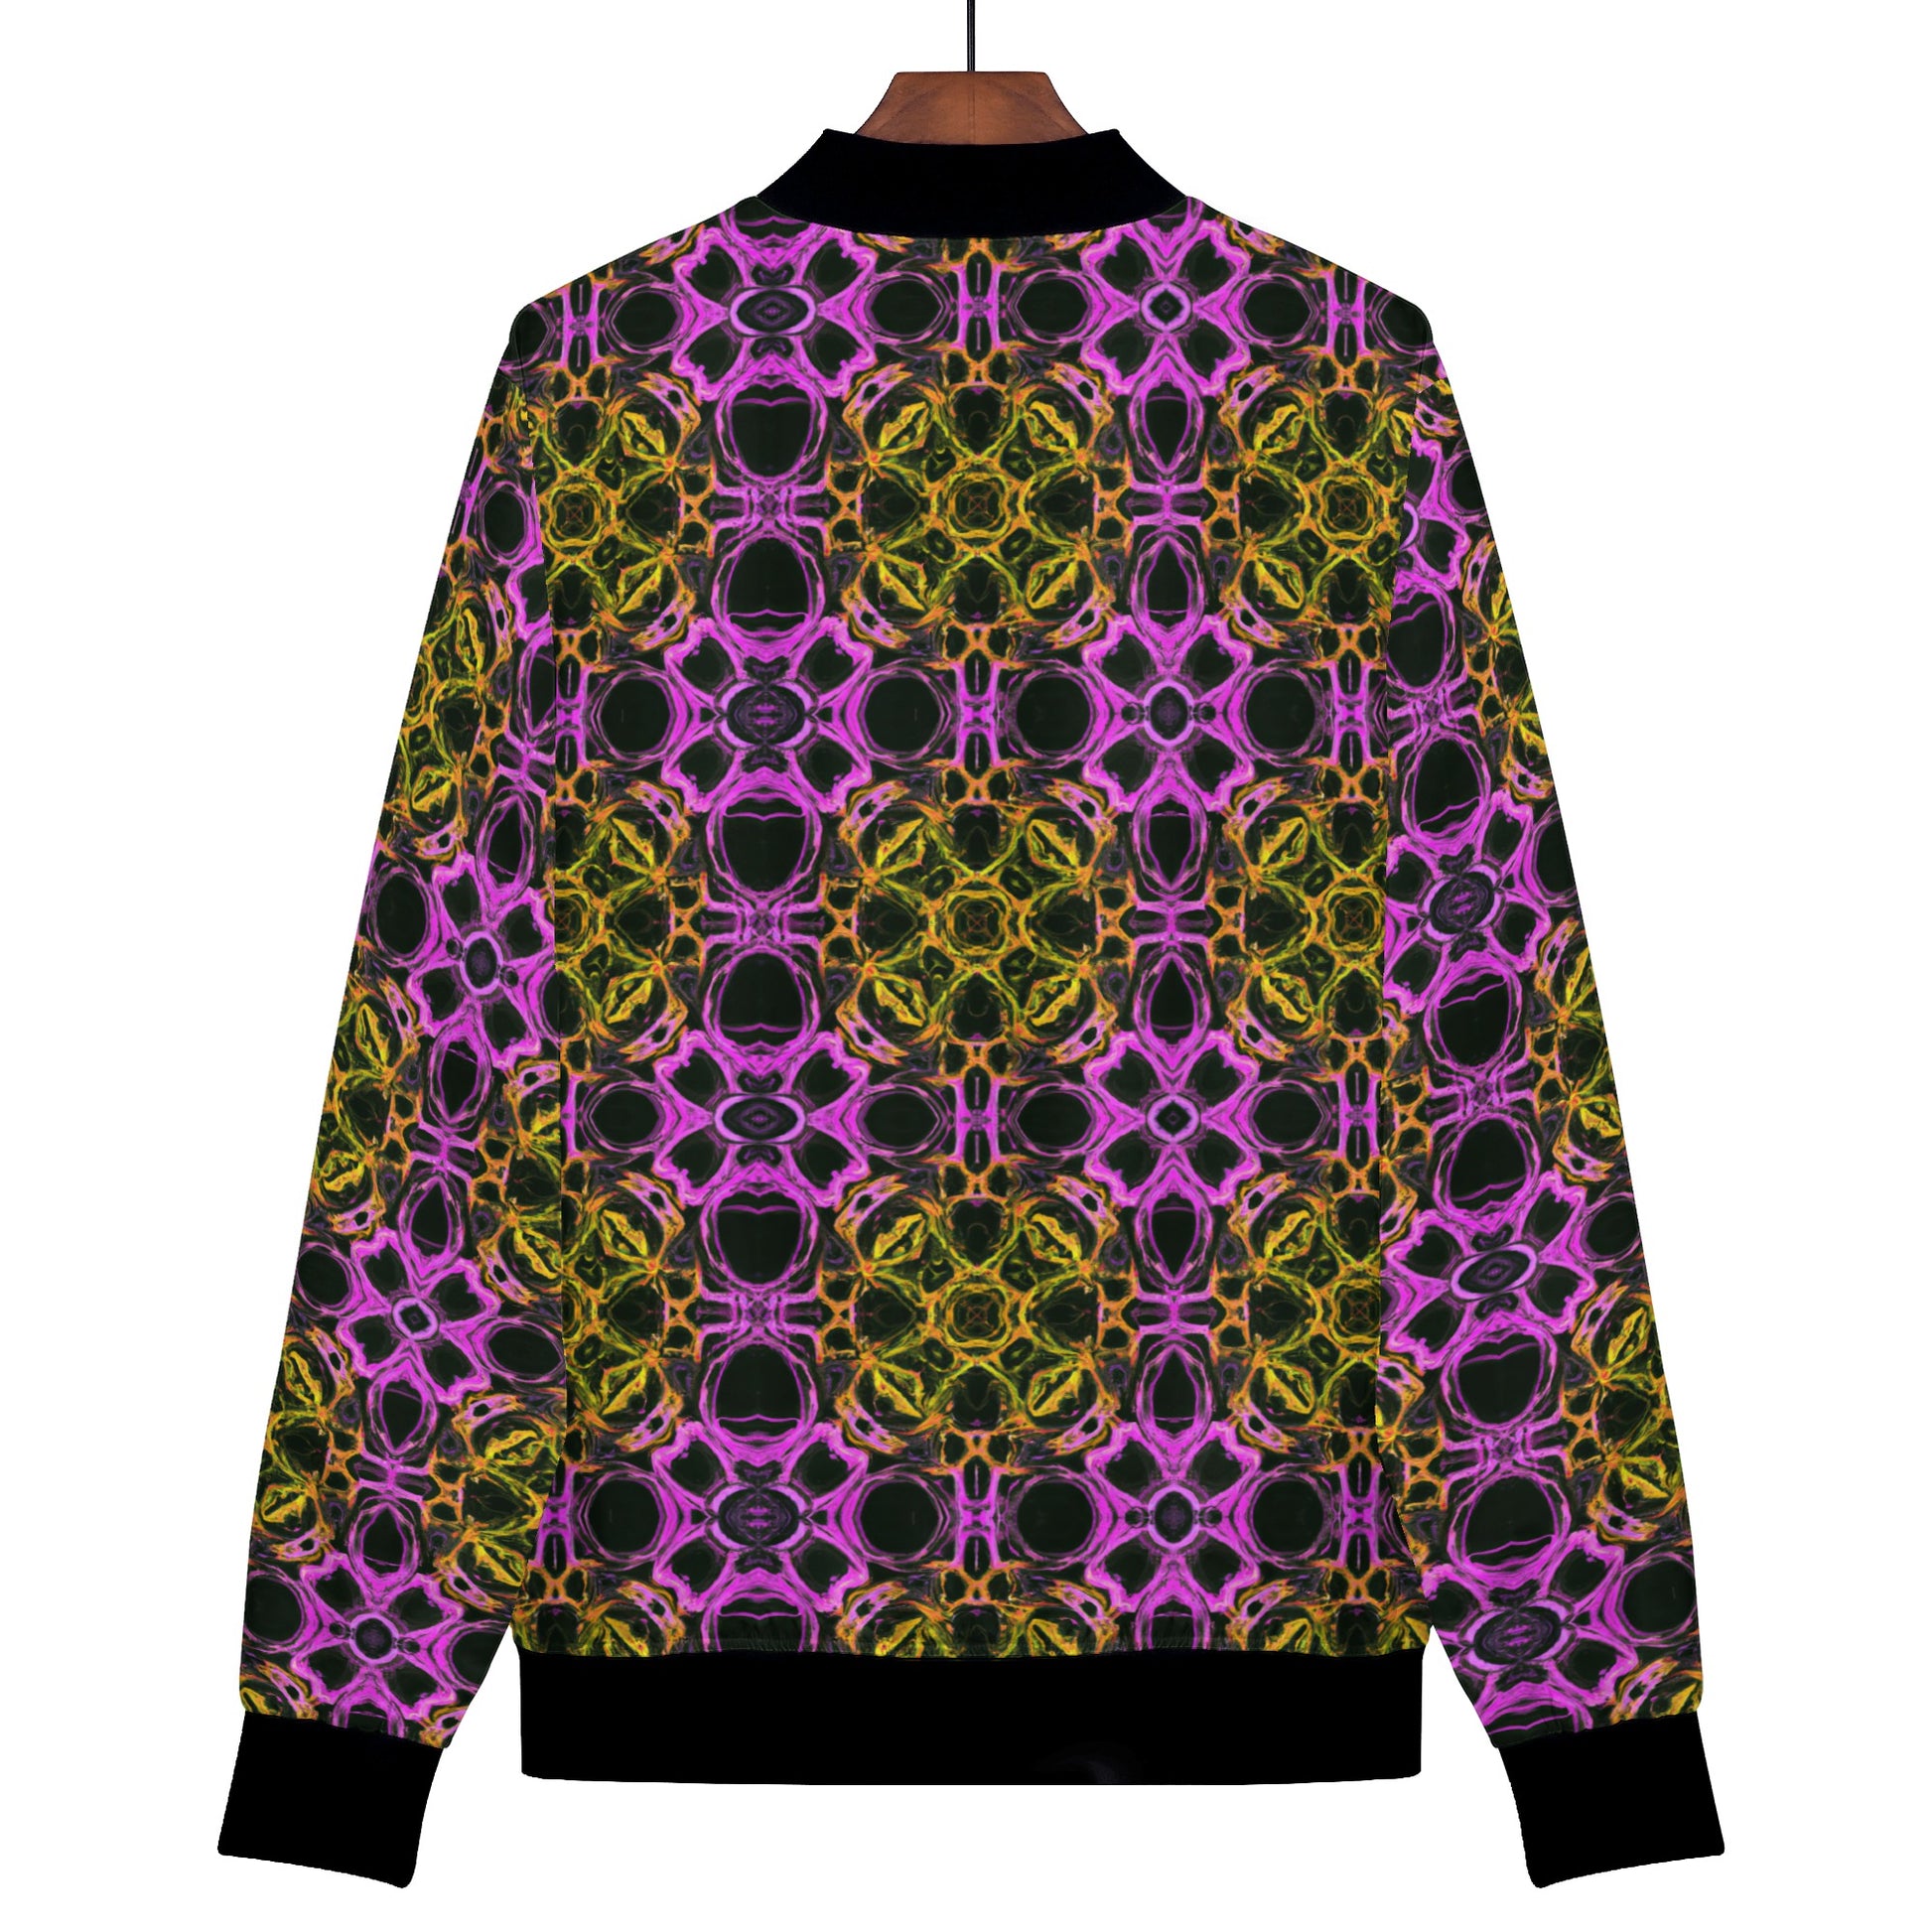 Be prepared to inspire wonder and awe wherever you go with this bold statement piece. Dare to embrace your wild side and make a splash with the mesmerizing psychedelic pattern. Crafted with quality and style in mind, this bomber jacket combines comfort and fashion seamlessly. Get ready to turn heads and unleash your inner adventurer with the Psychedelia Honeycomb Women's Bomber Jacket